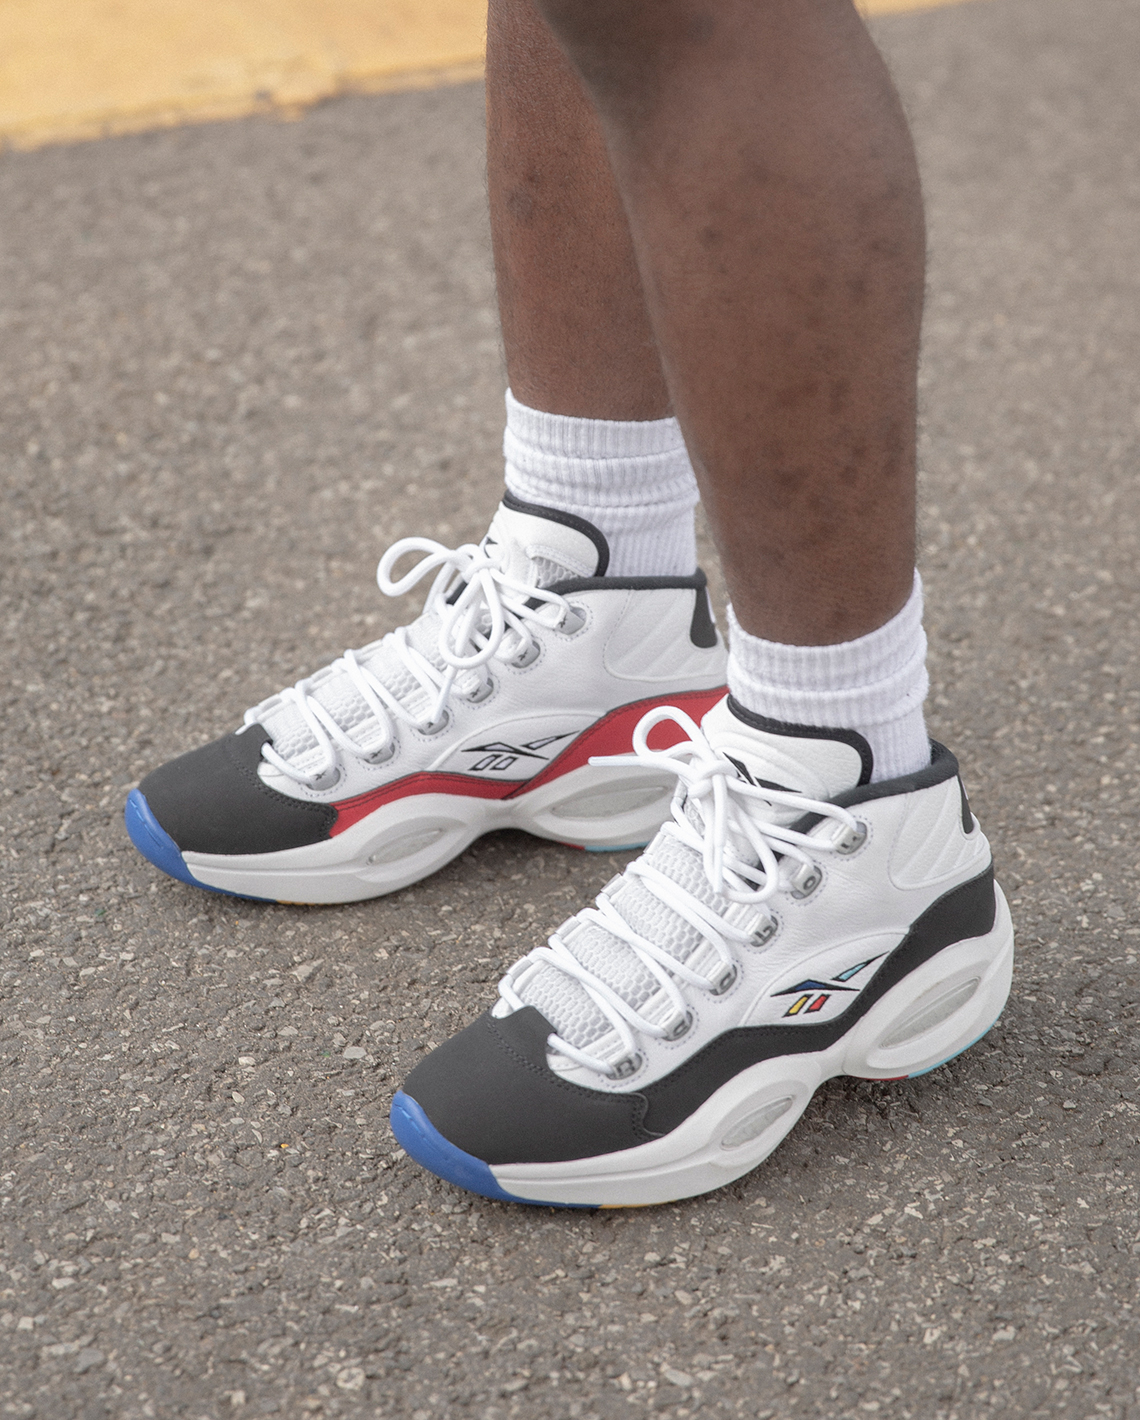 Reebok Question Mid Class Of 16 H01321 Release Date 6